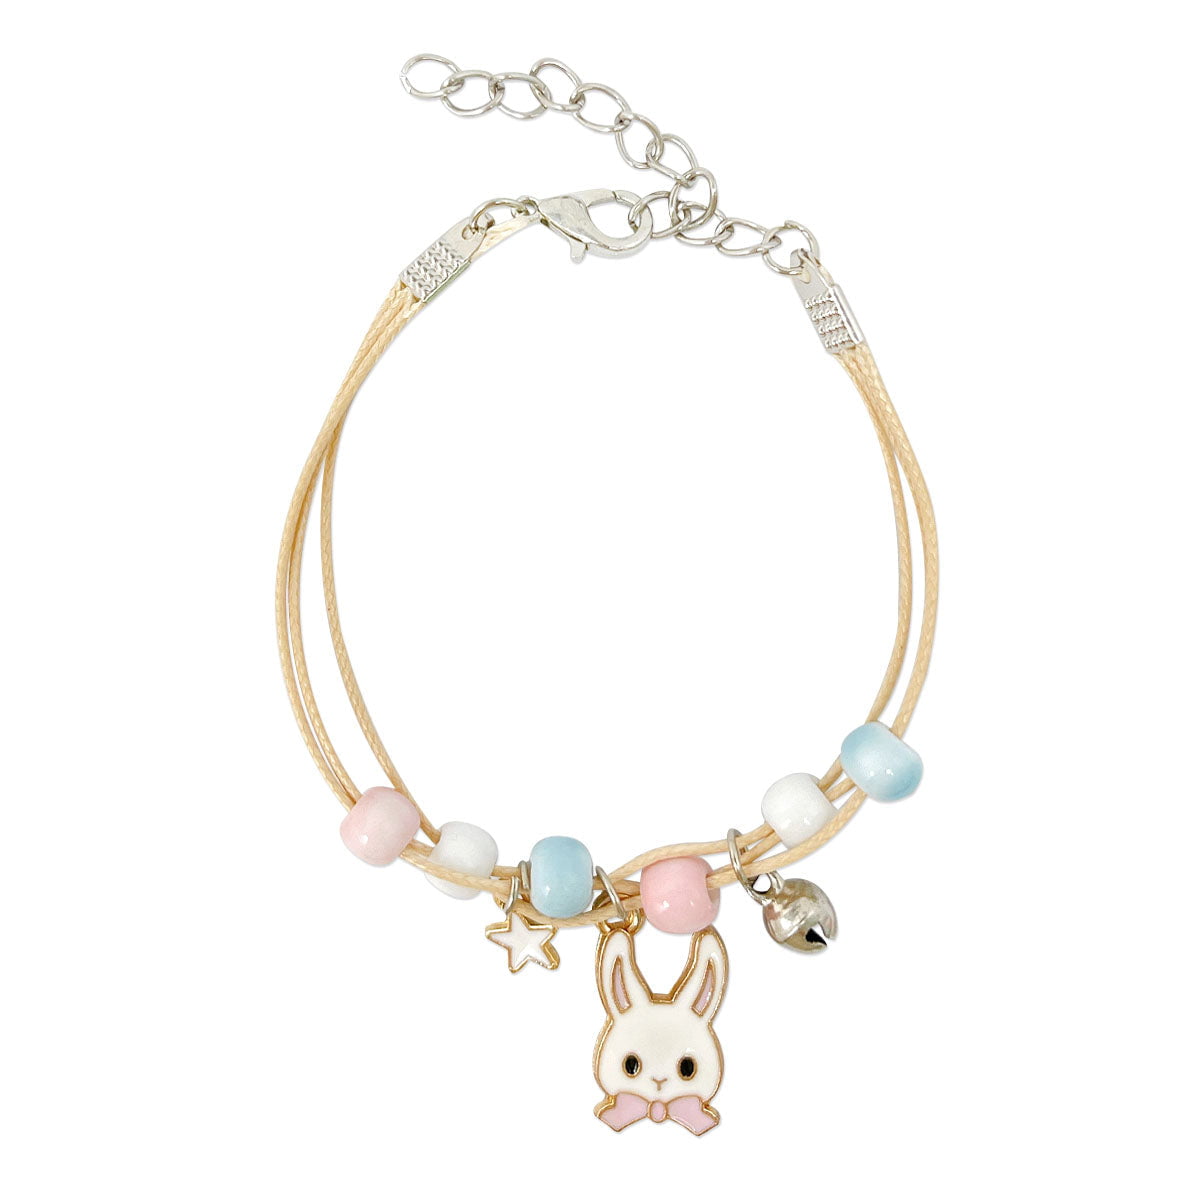 Rabbit Charm Bracelet Hand-Enameled, Pearls, and Bunny Charms for Easter –  Blackberry Designs Jewelry